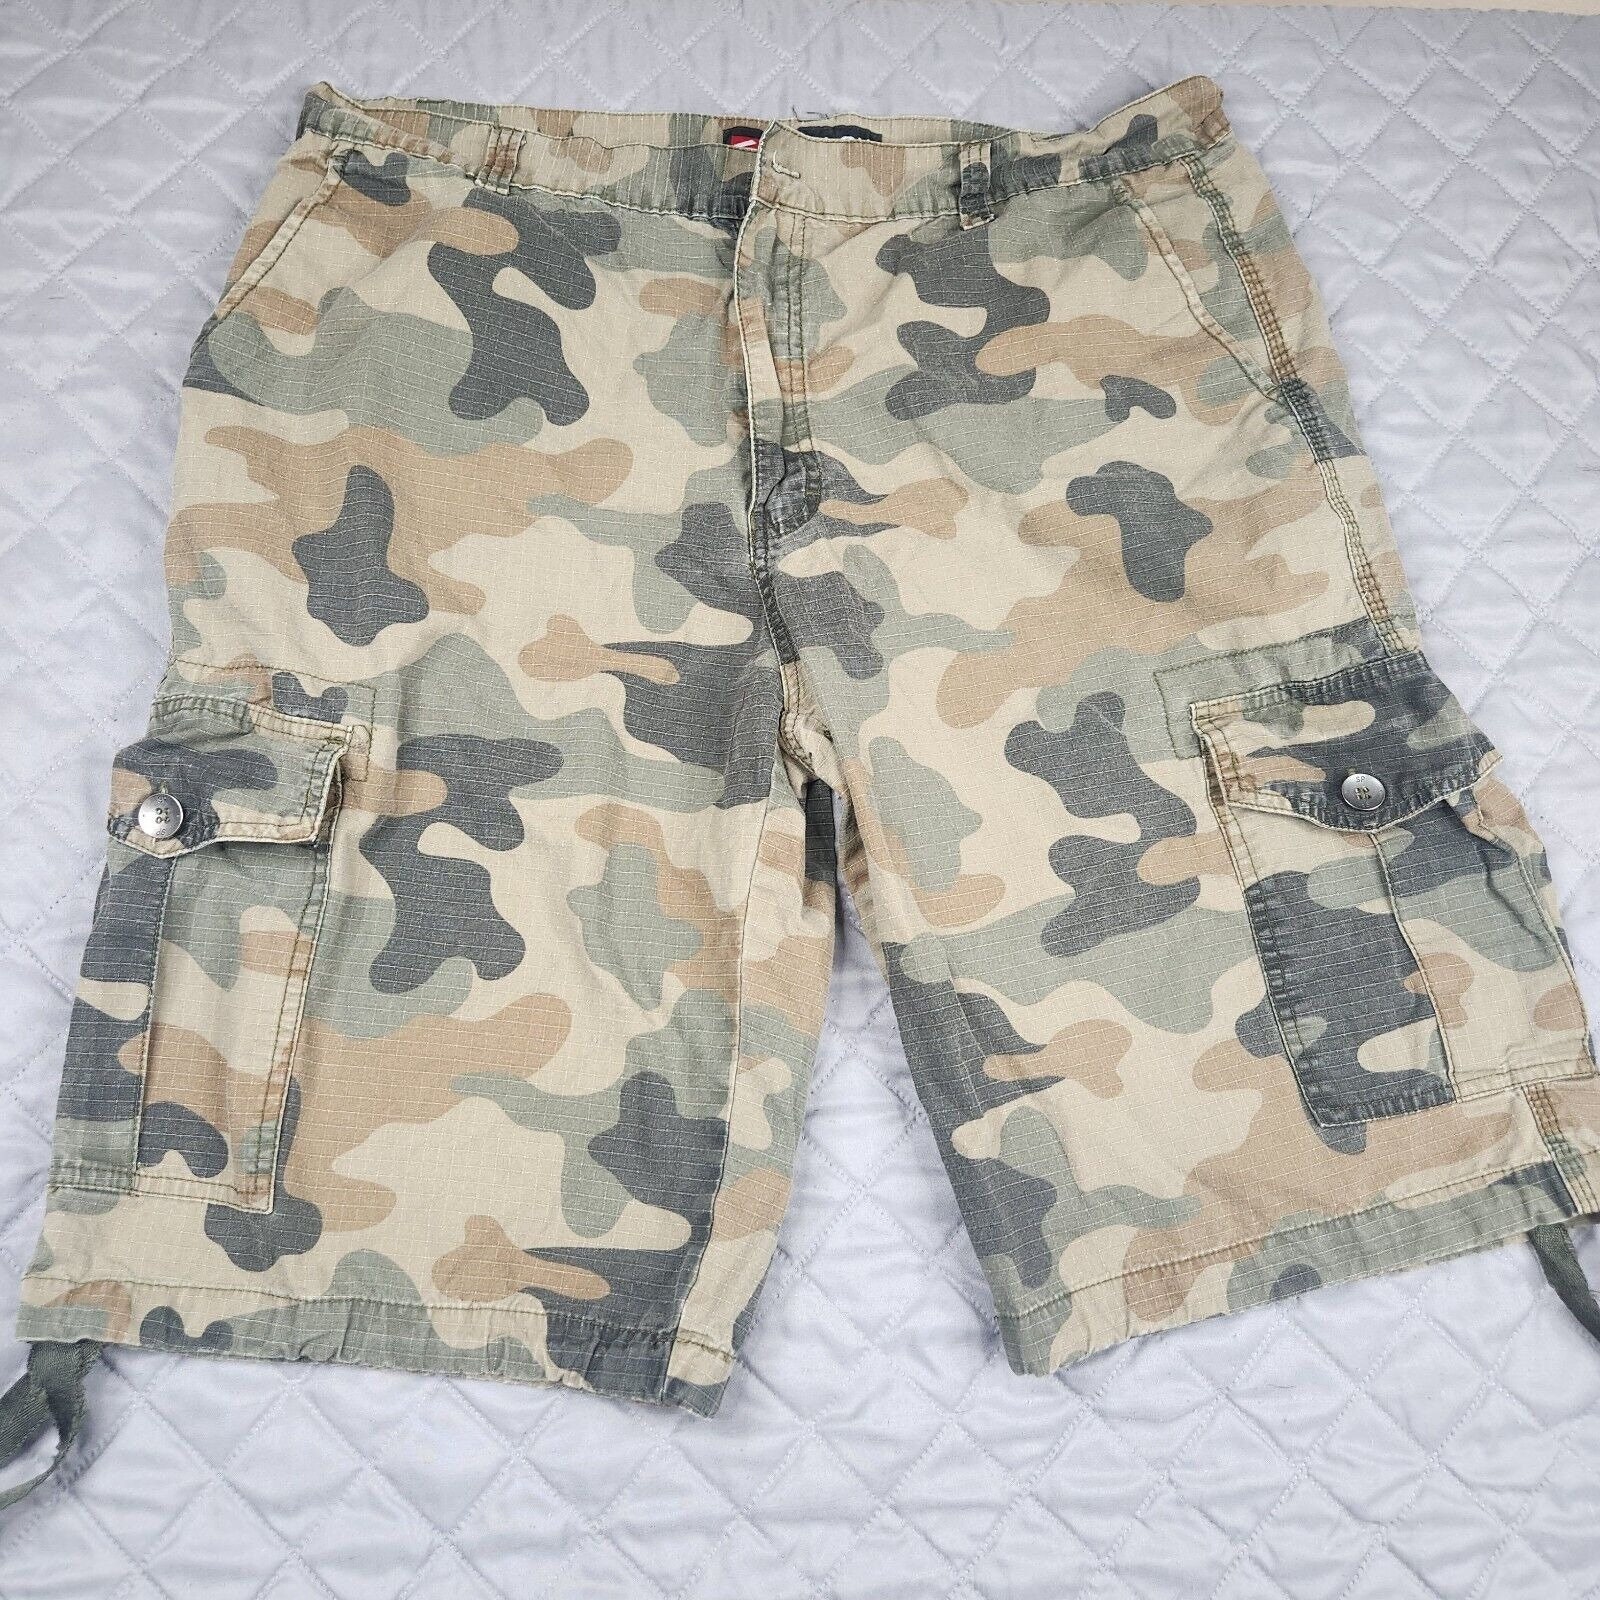 Trying to Be Seen (or Not Seen) This Year? Wear These Camo Pants | Gear  Patrol